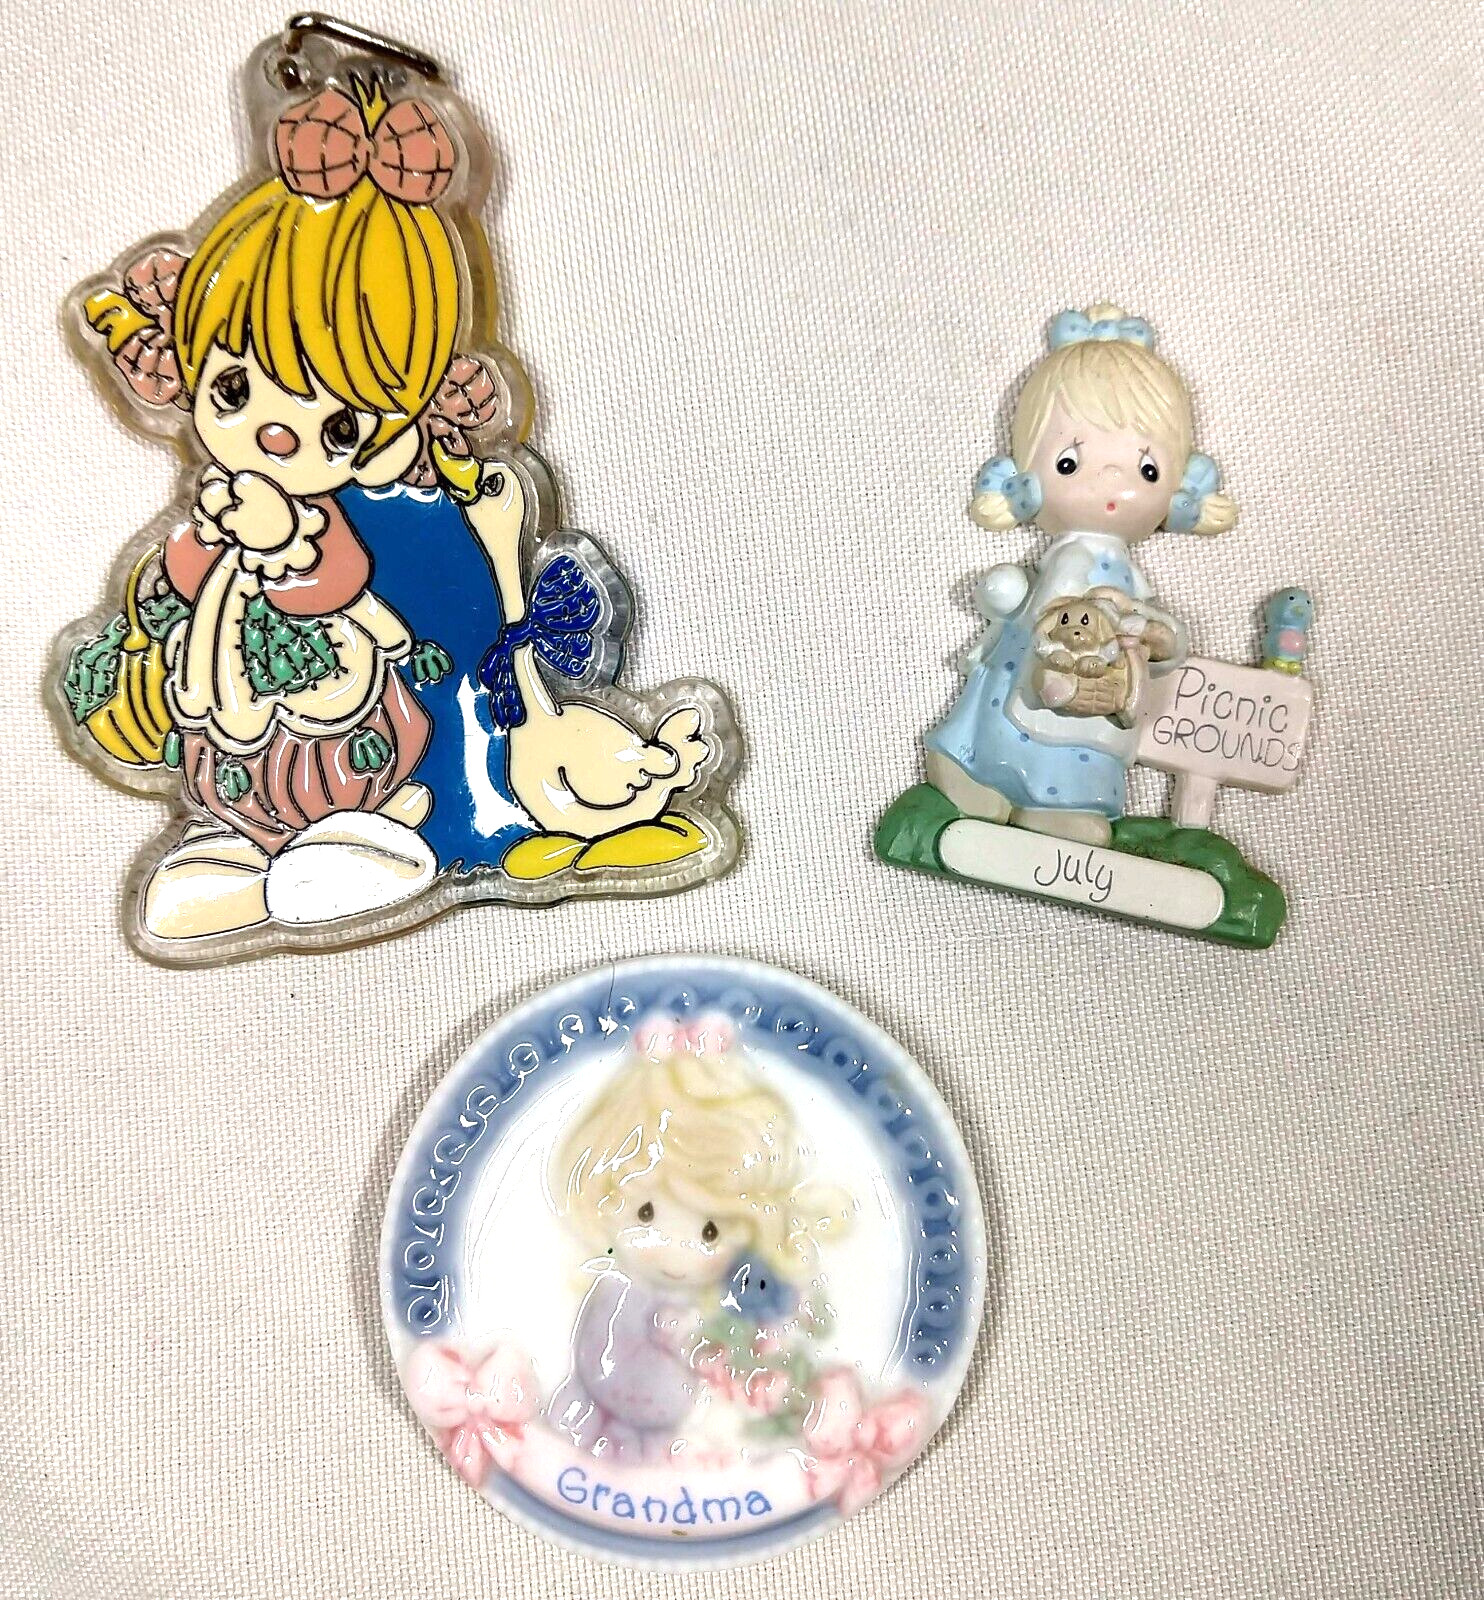 Vintage Precious Moments items porcelain & July magnets 1990 keychain